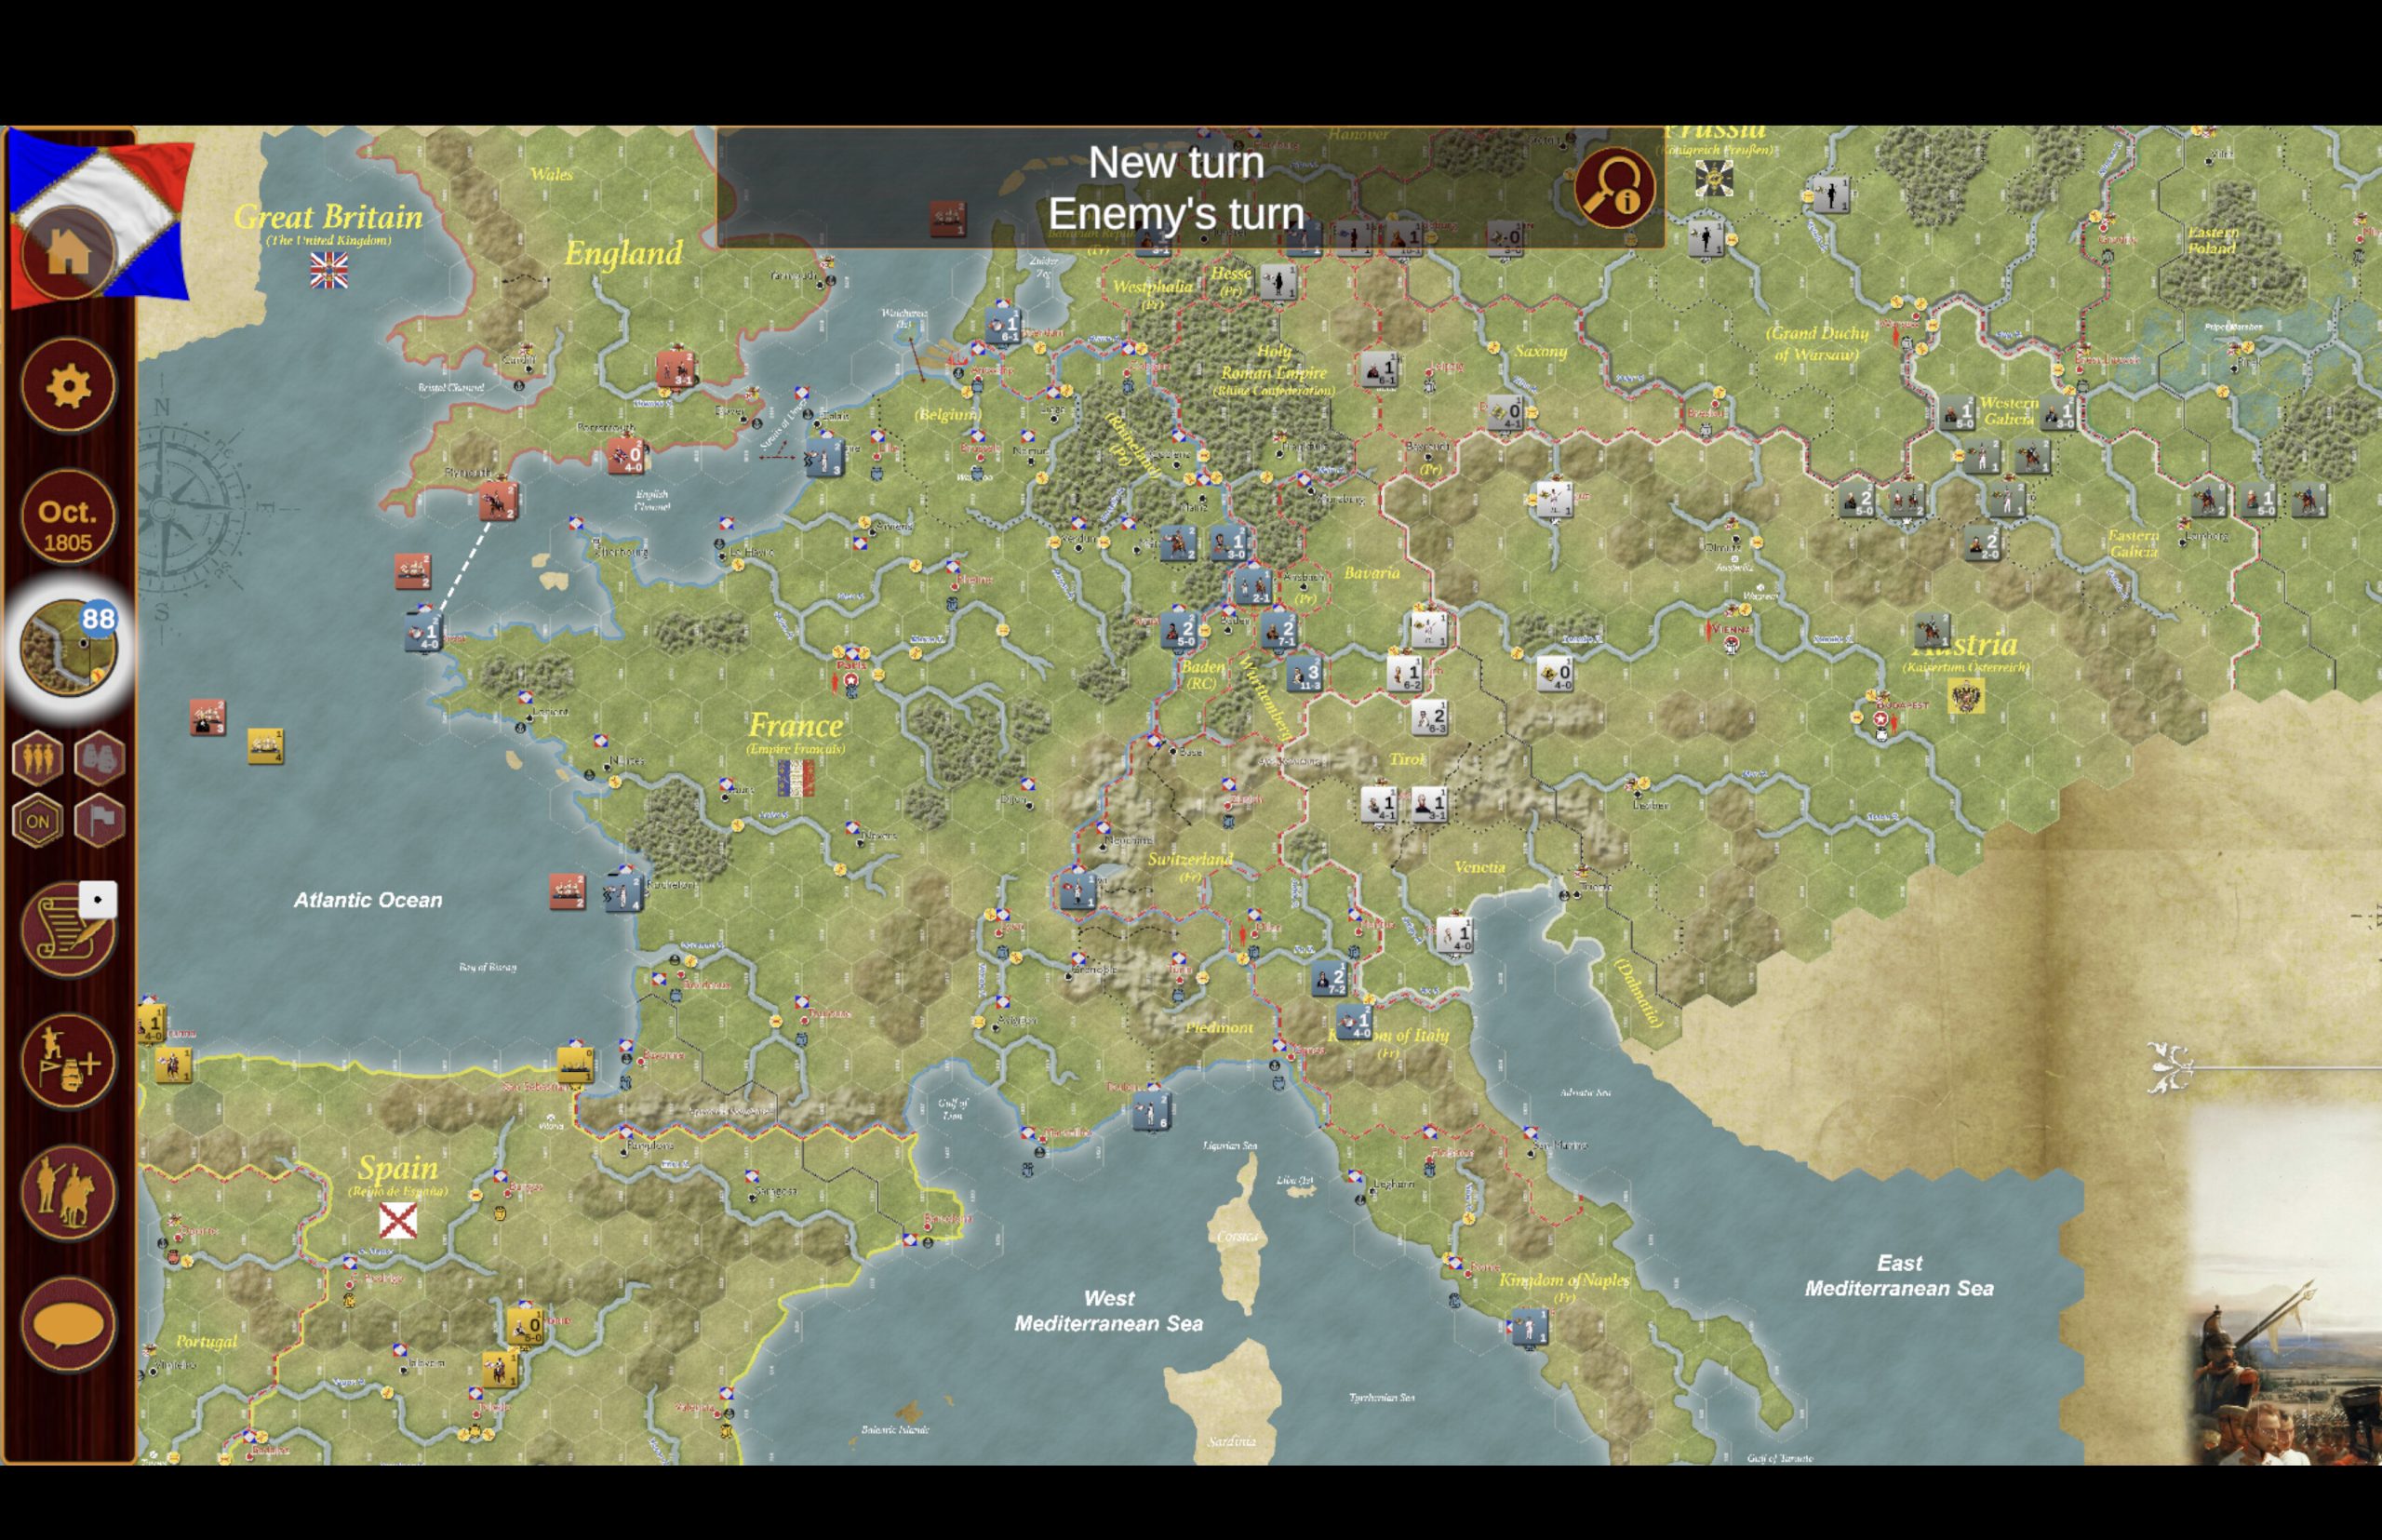 A screenshot from the Digital Edition of War and Peace